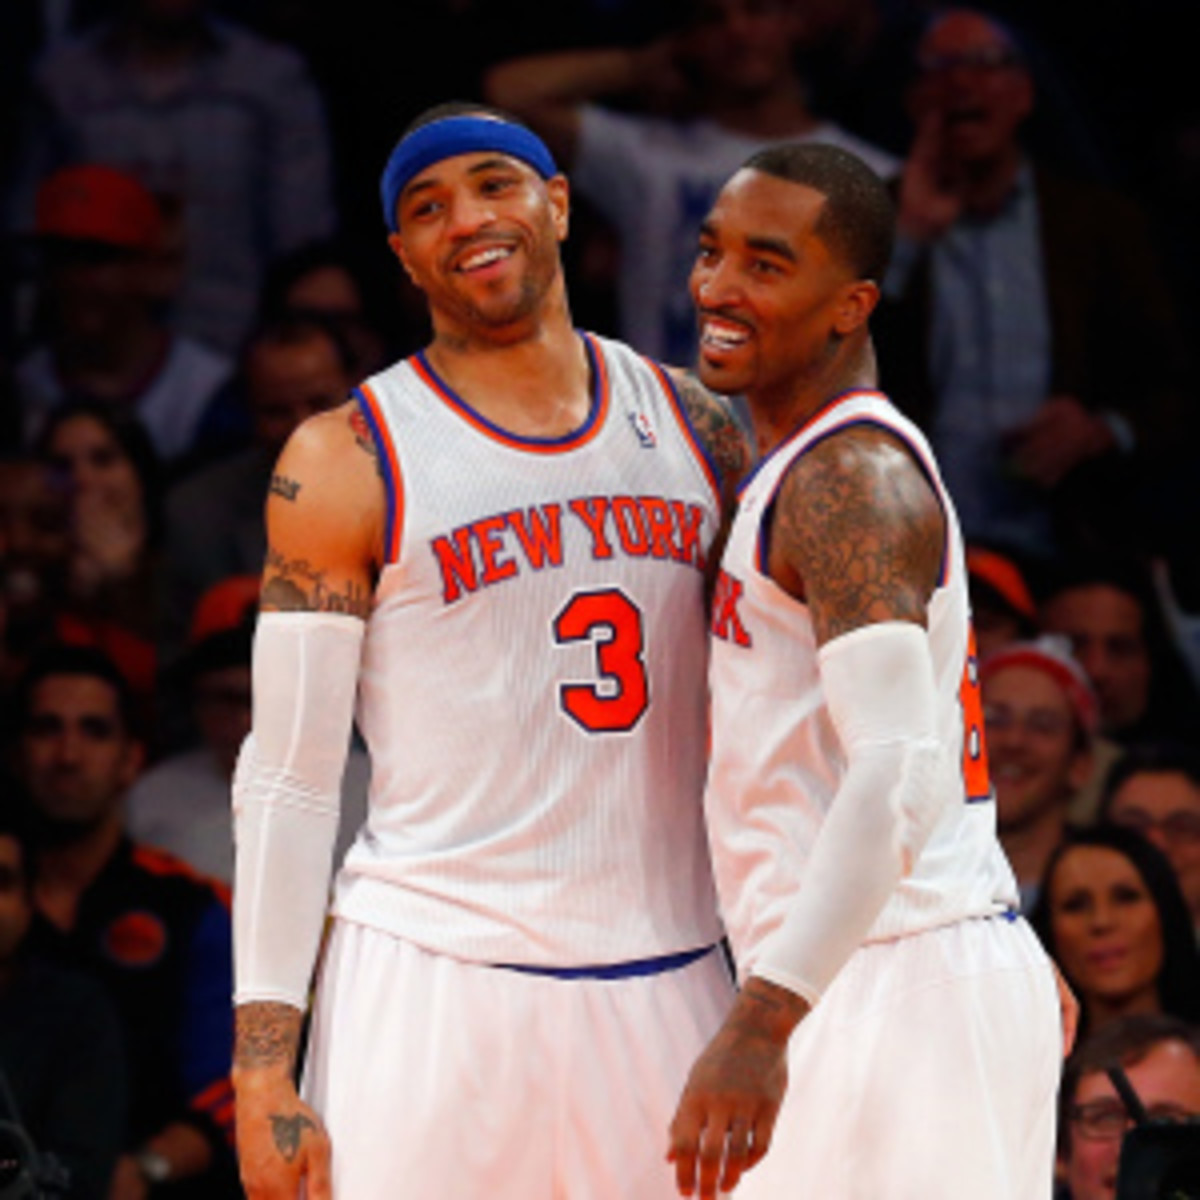 J.R. Smith and Kenyon Martin will play in Game 4. (Jim McIsaac/Getty Images)